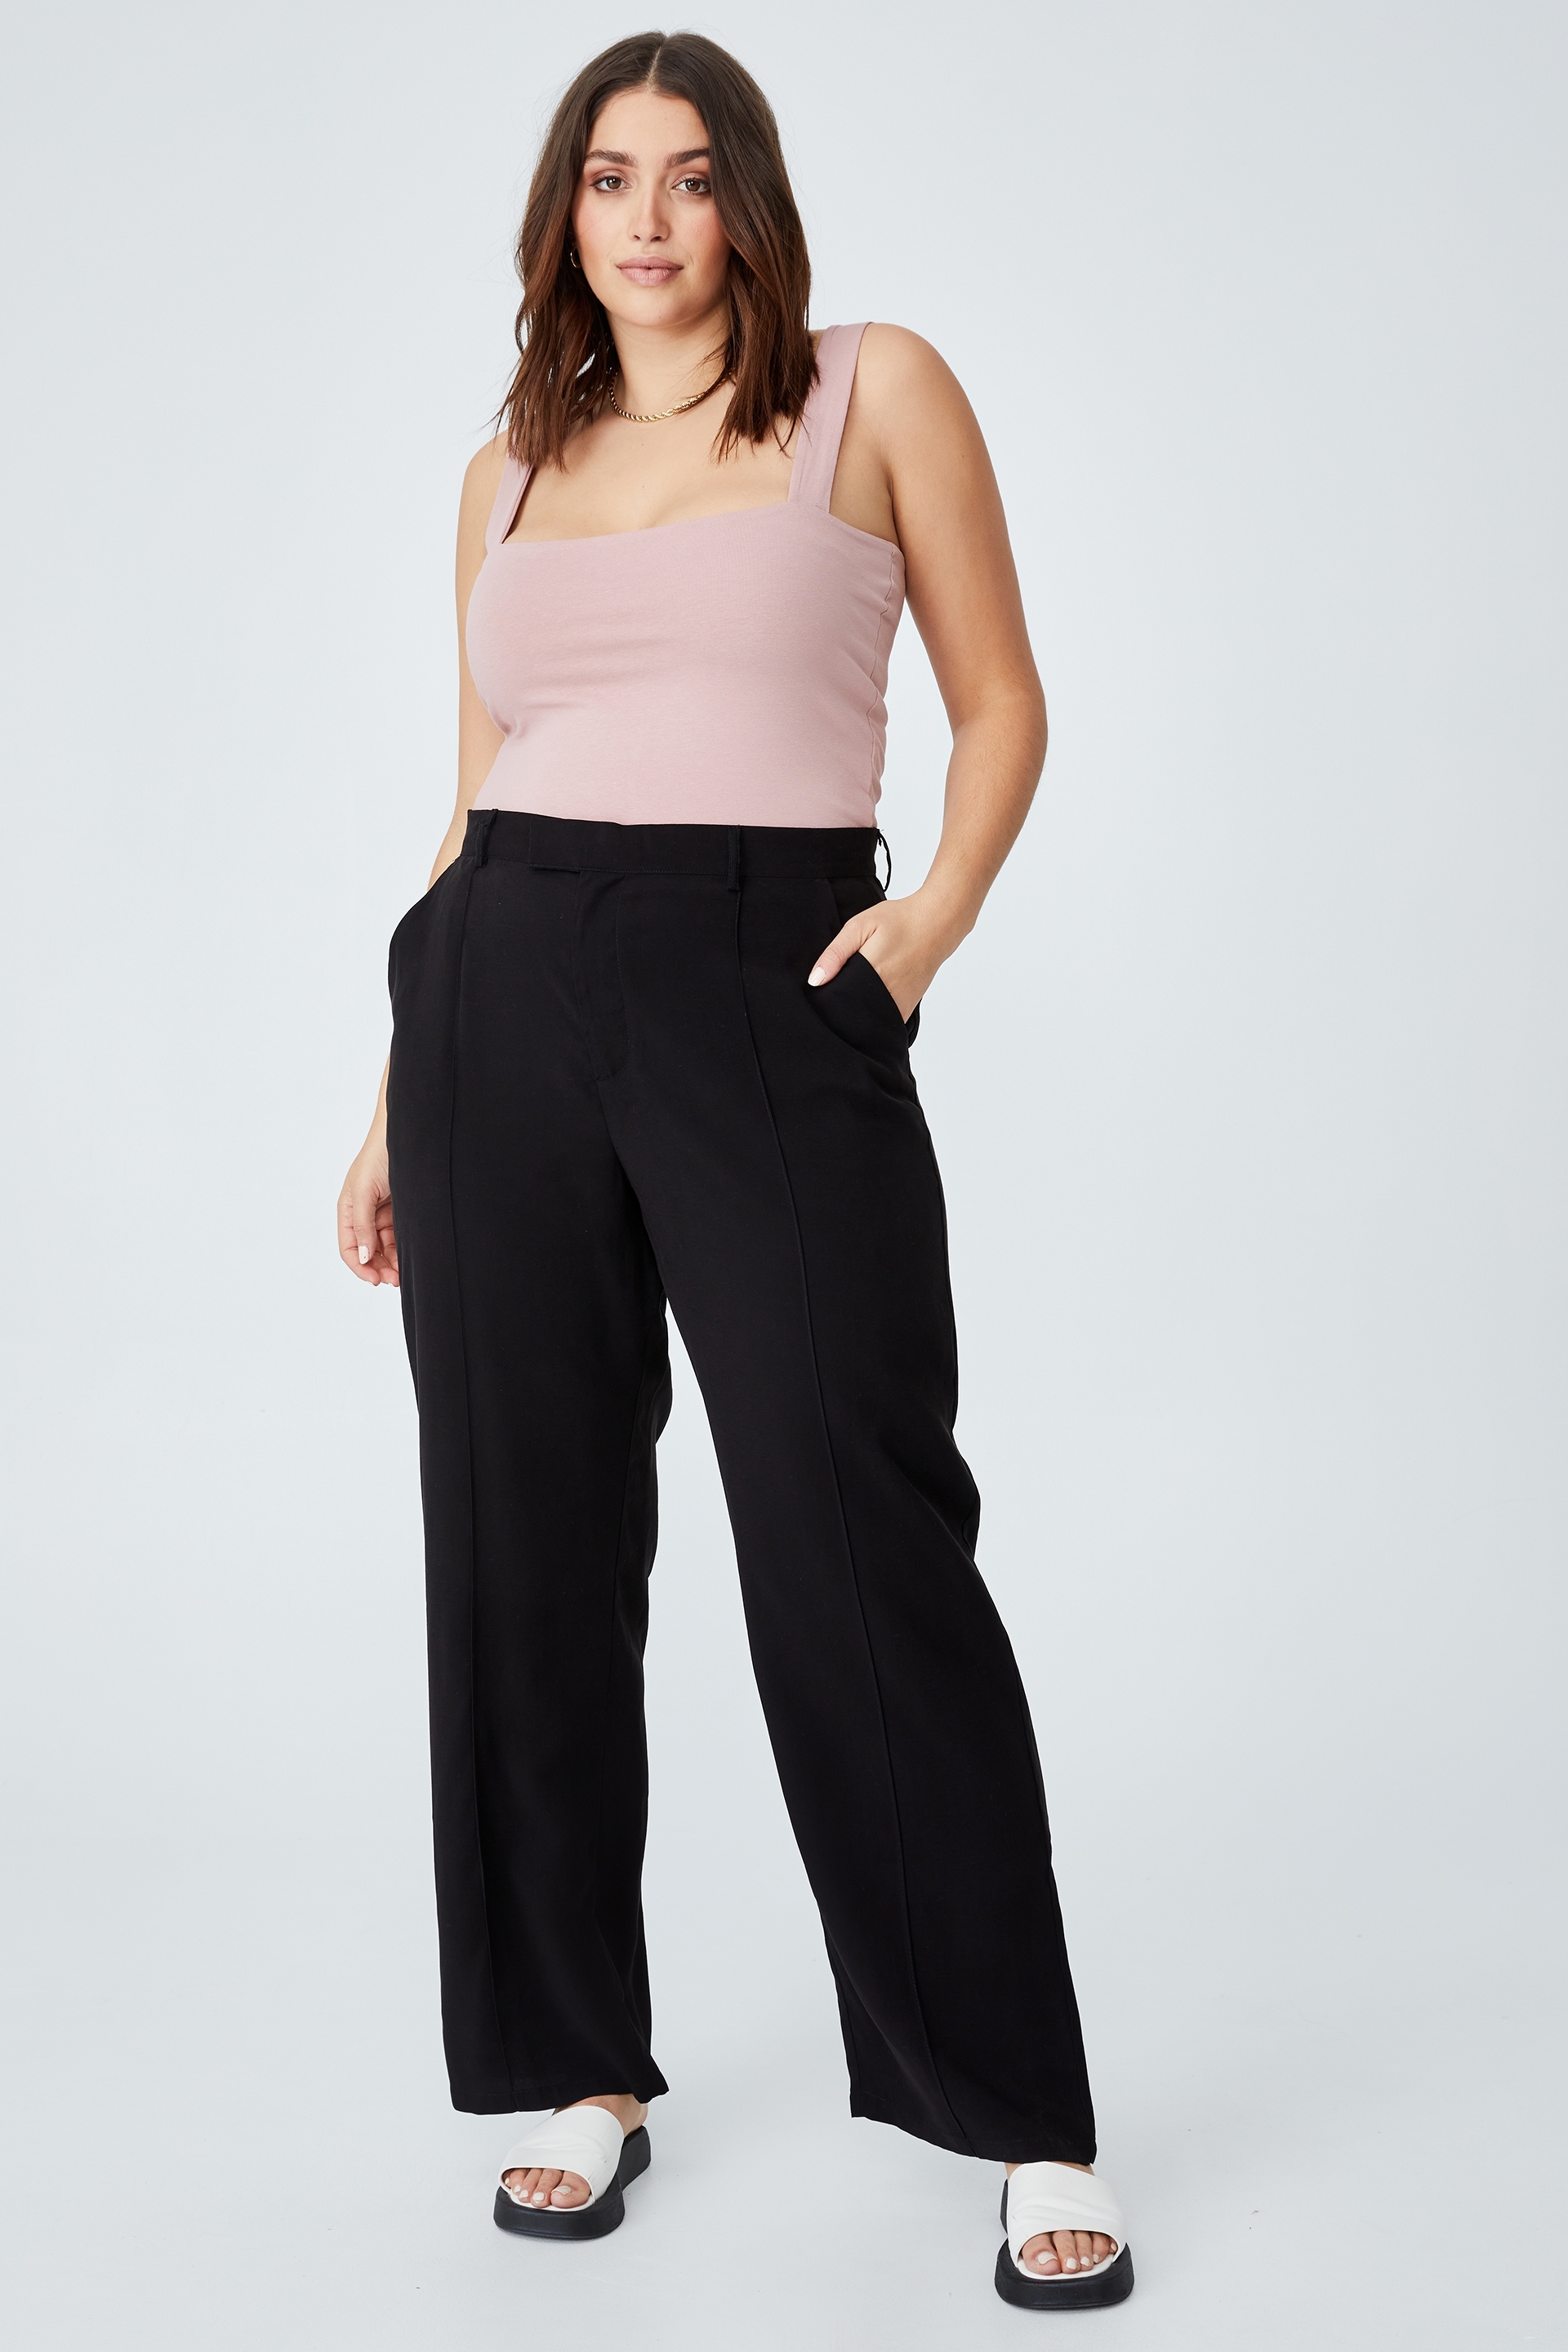 Cotton On Women - Curve Darcy Soft Tailored Pant - Black